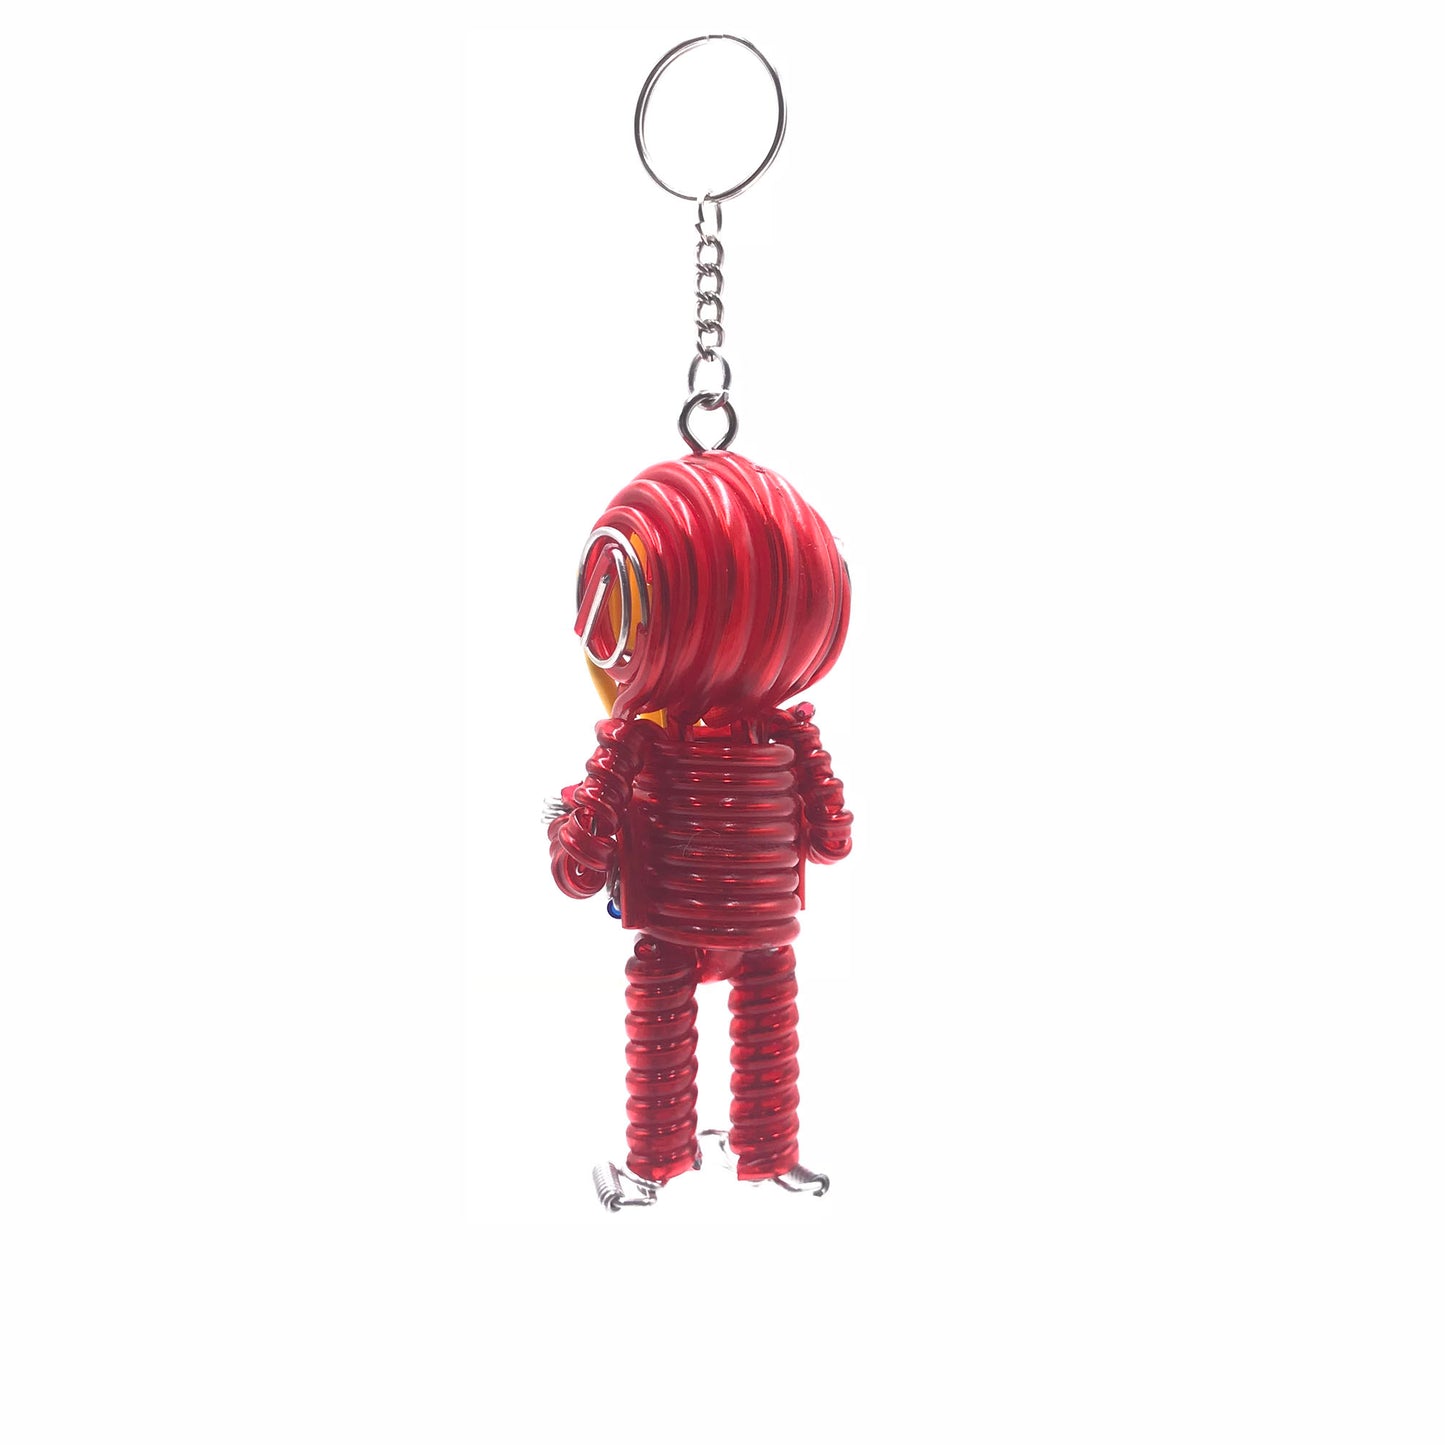 Miniature Wire Art Iron man Keychain hand-crafted from aluminium wire